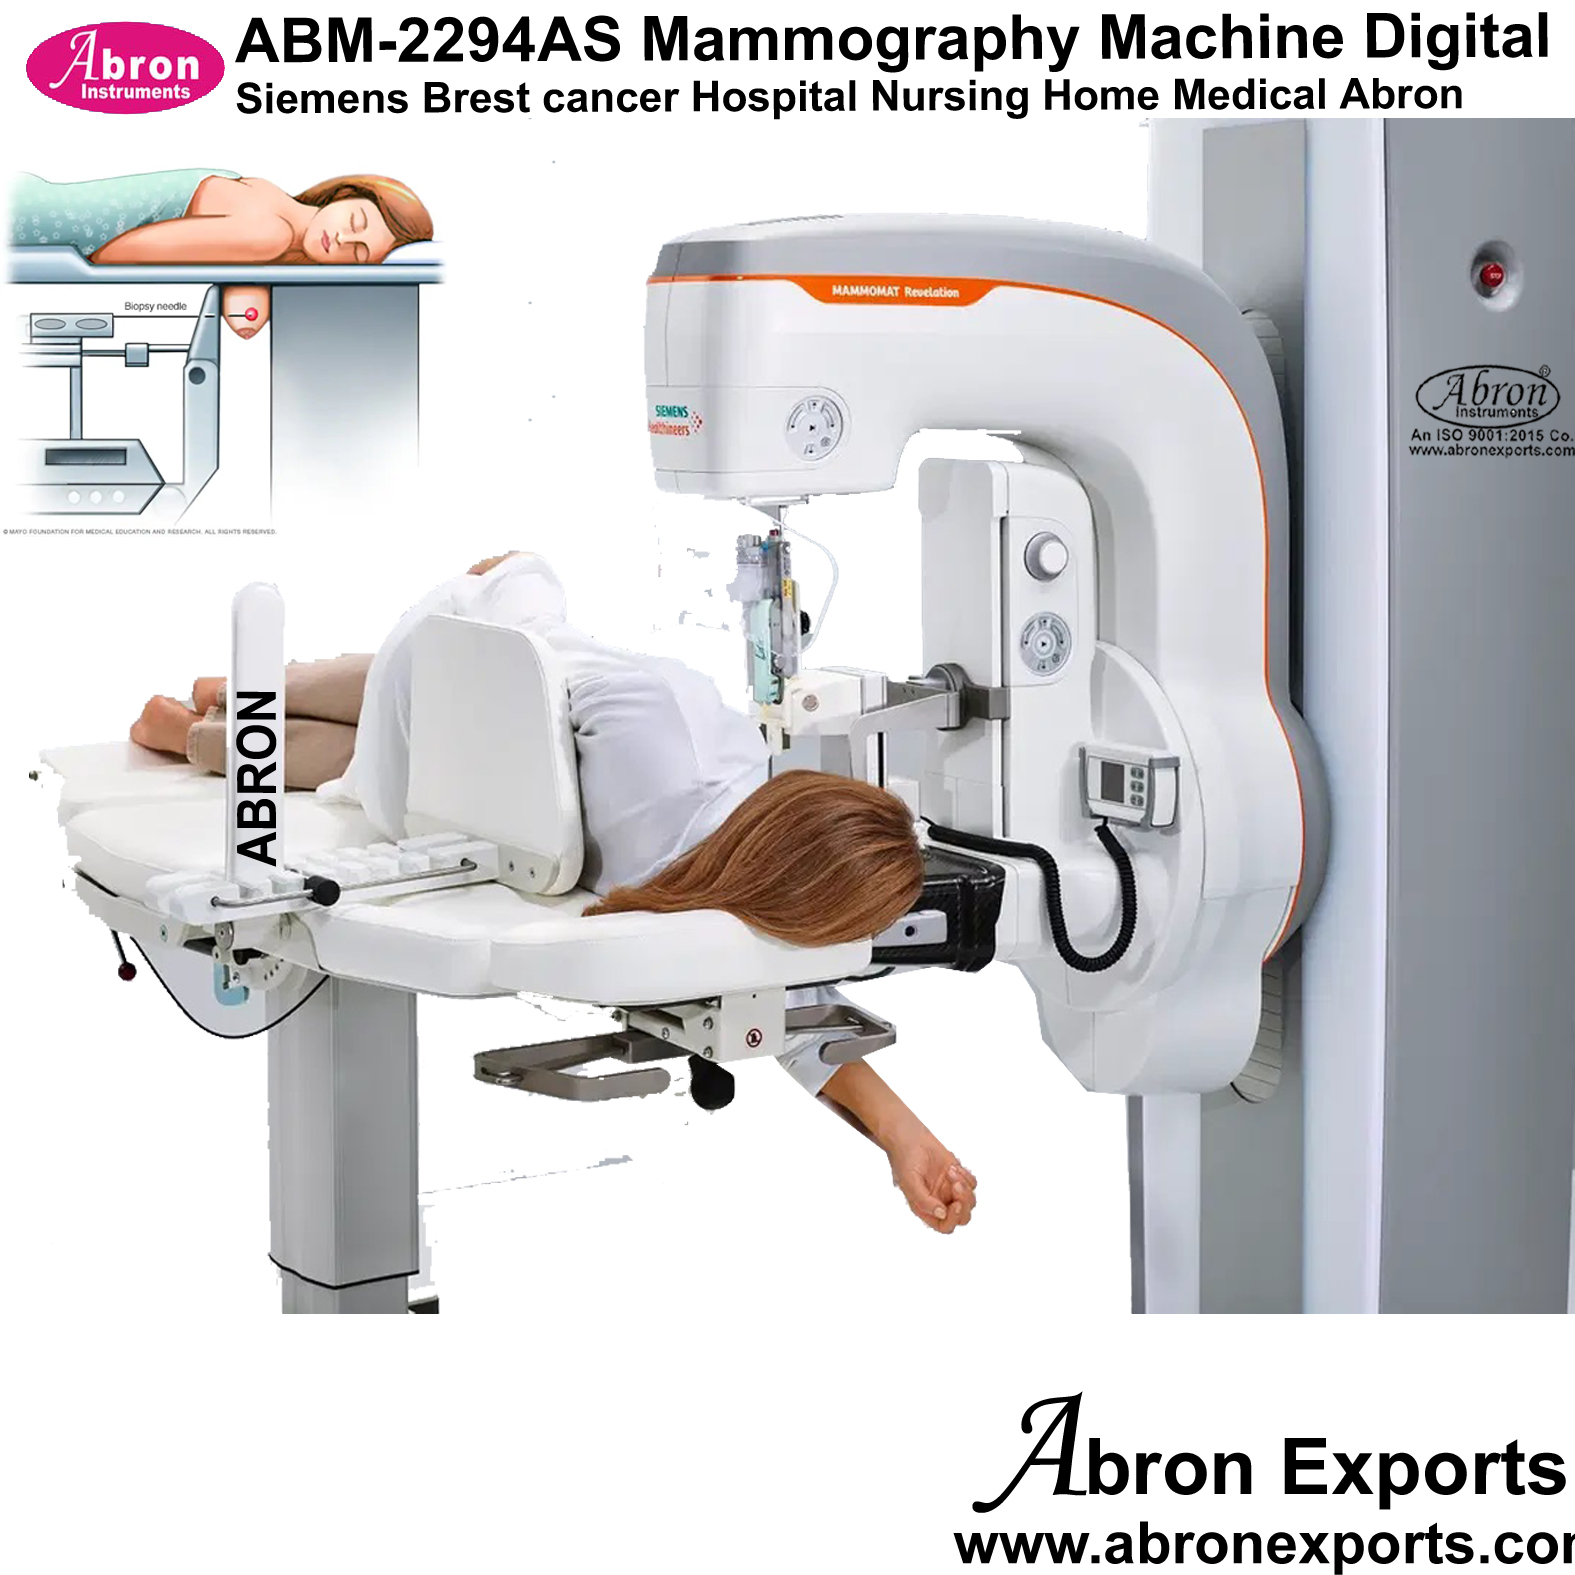 Mamography Siemens XP scanner revelation with biopsy reclining Hospital Nursing Home Medical Abron ABM-2293ASE 